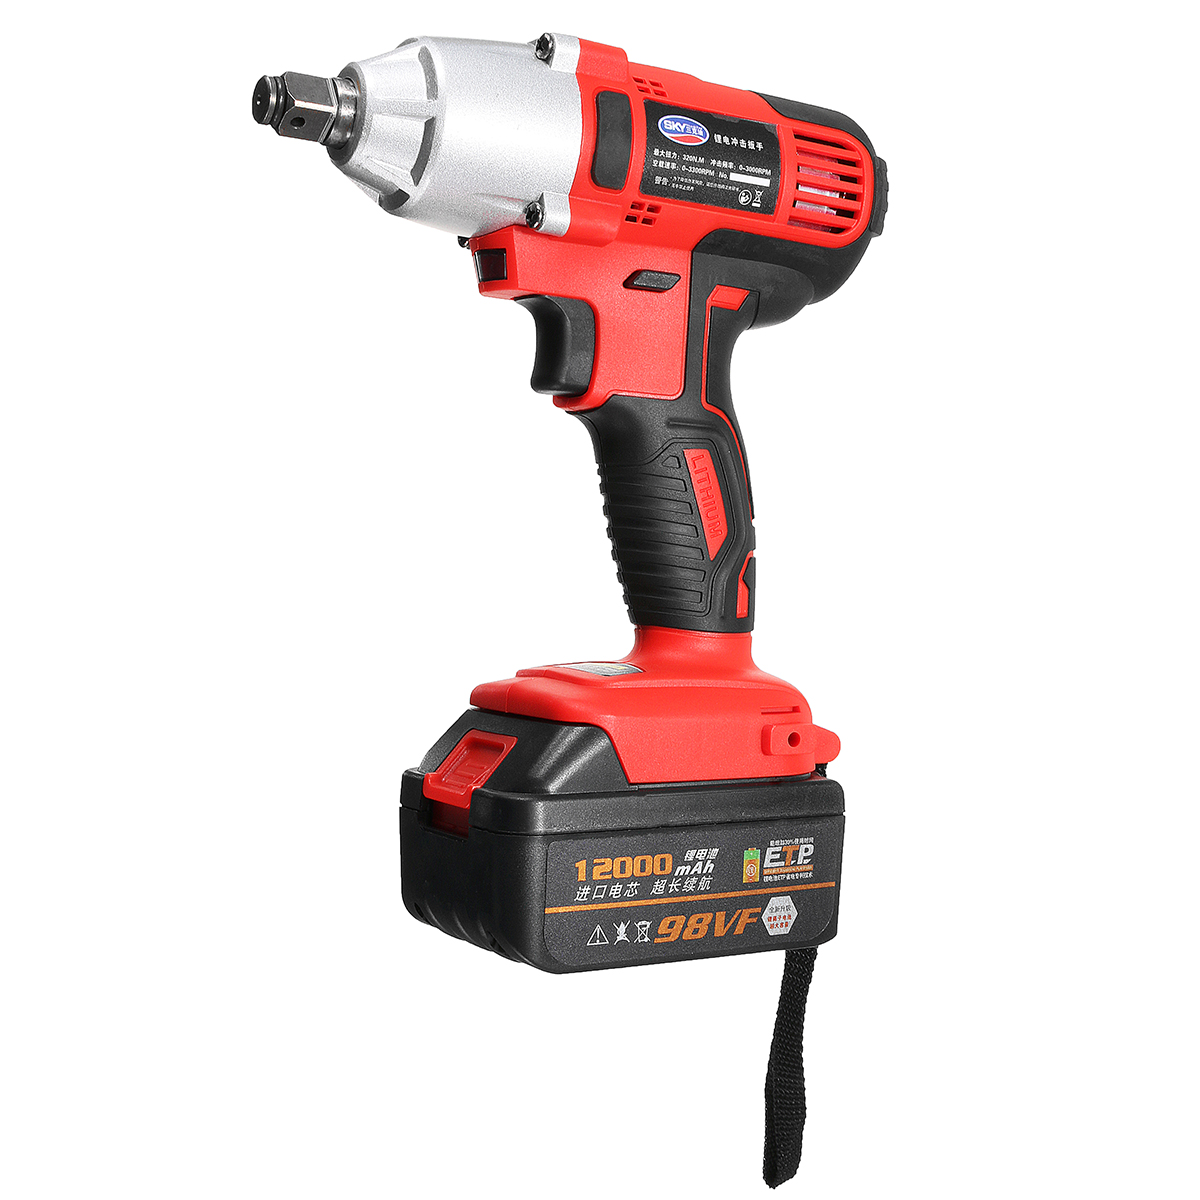 

98V 12000mAh Electric Wrench Lithium Cordless Impact Wrench Li-ion Battery High Torque Power Tool